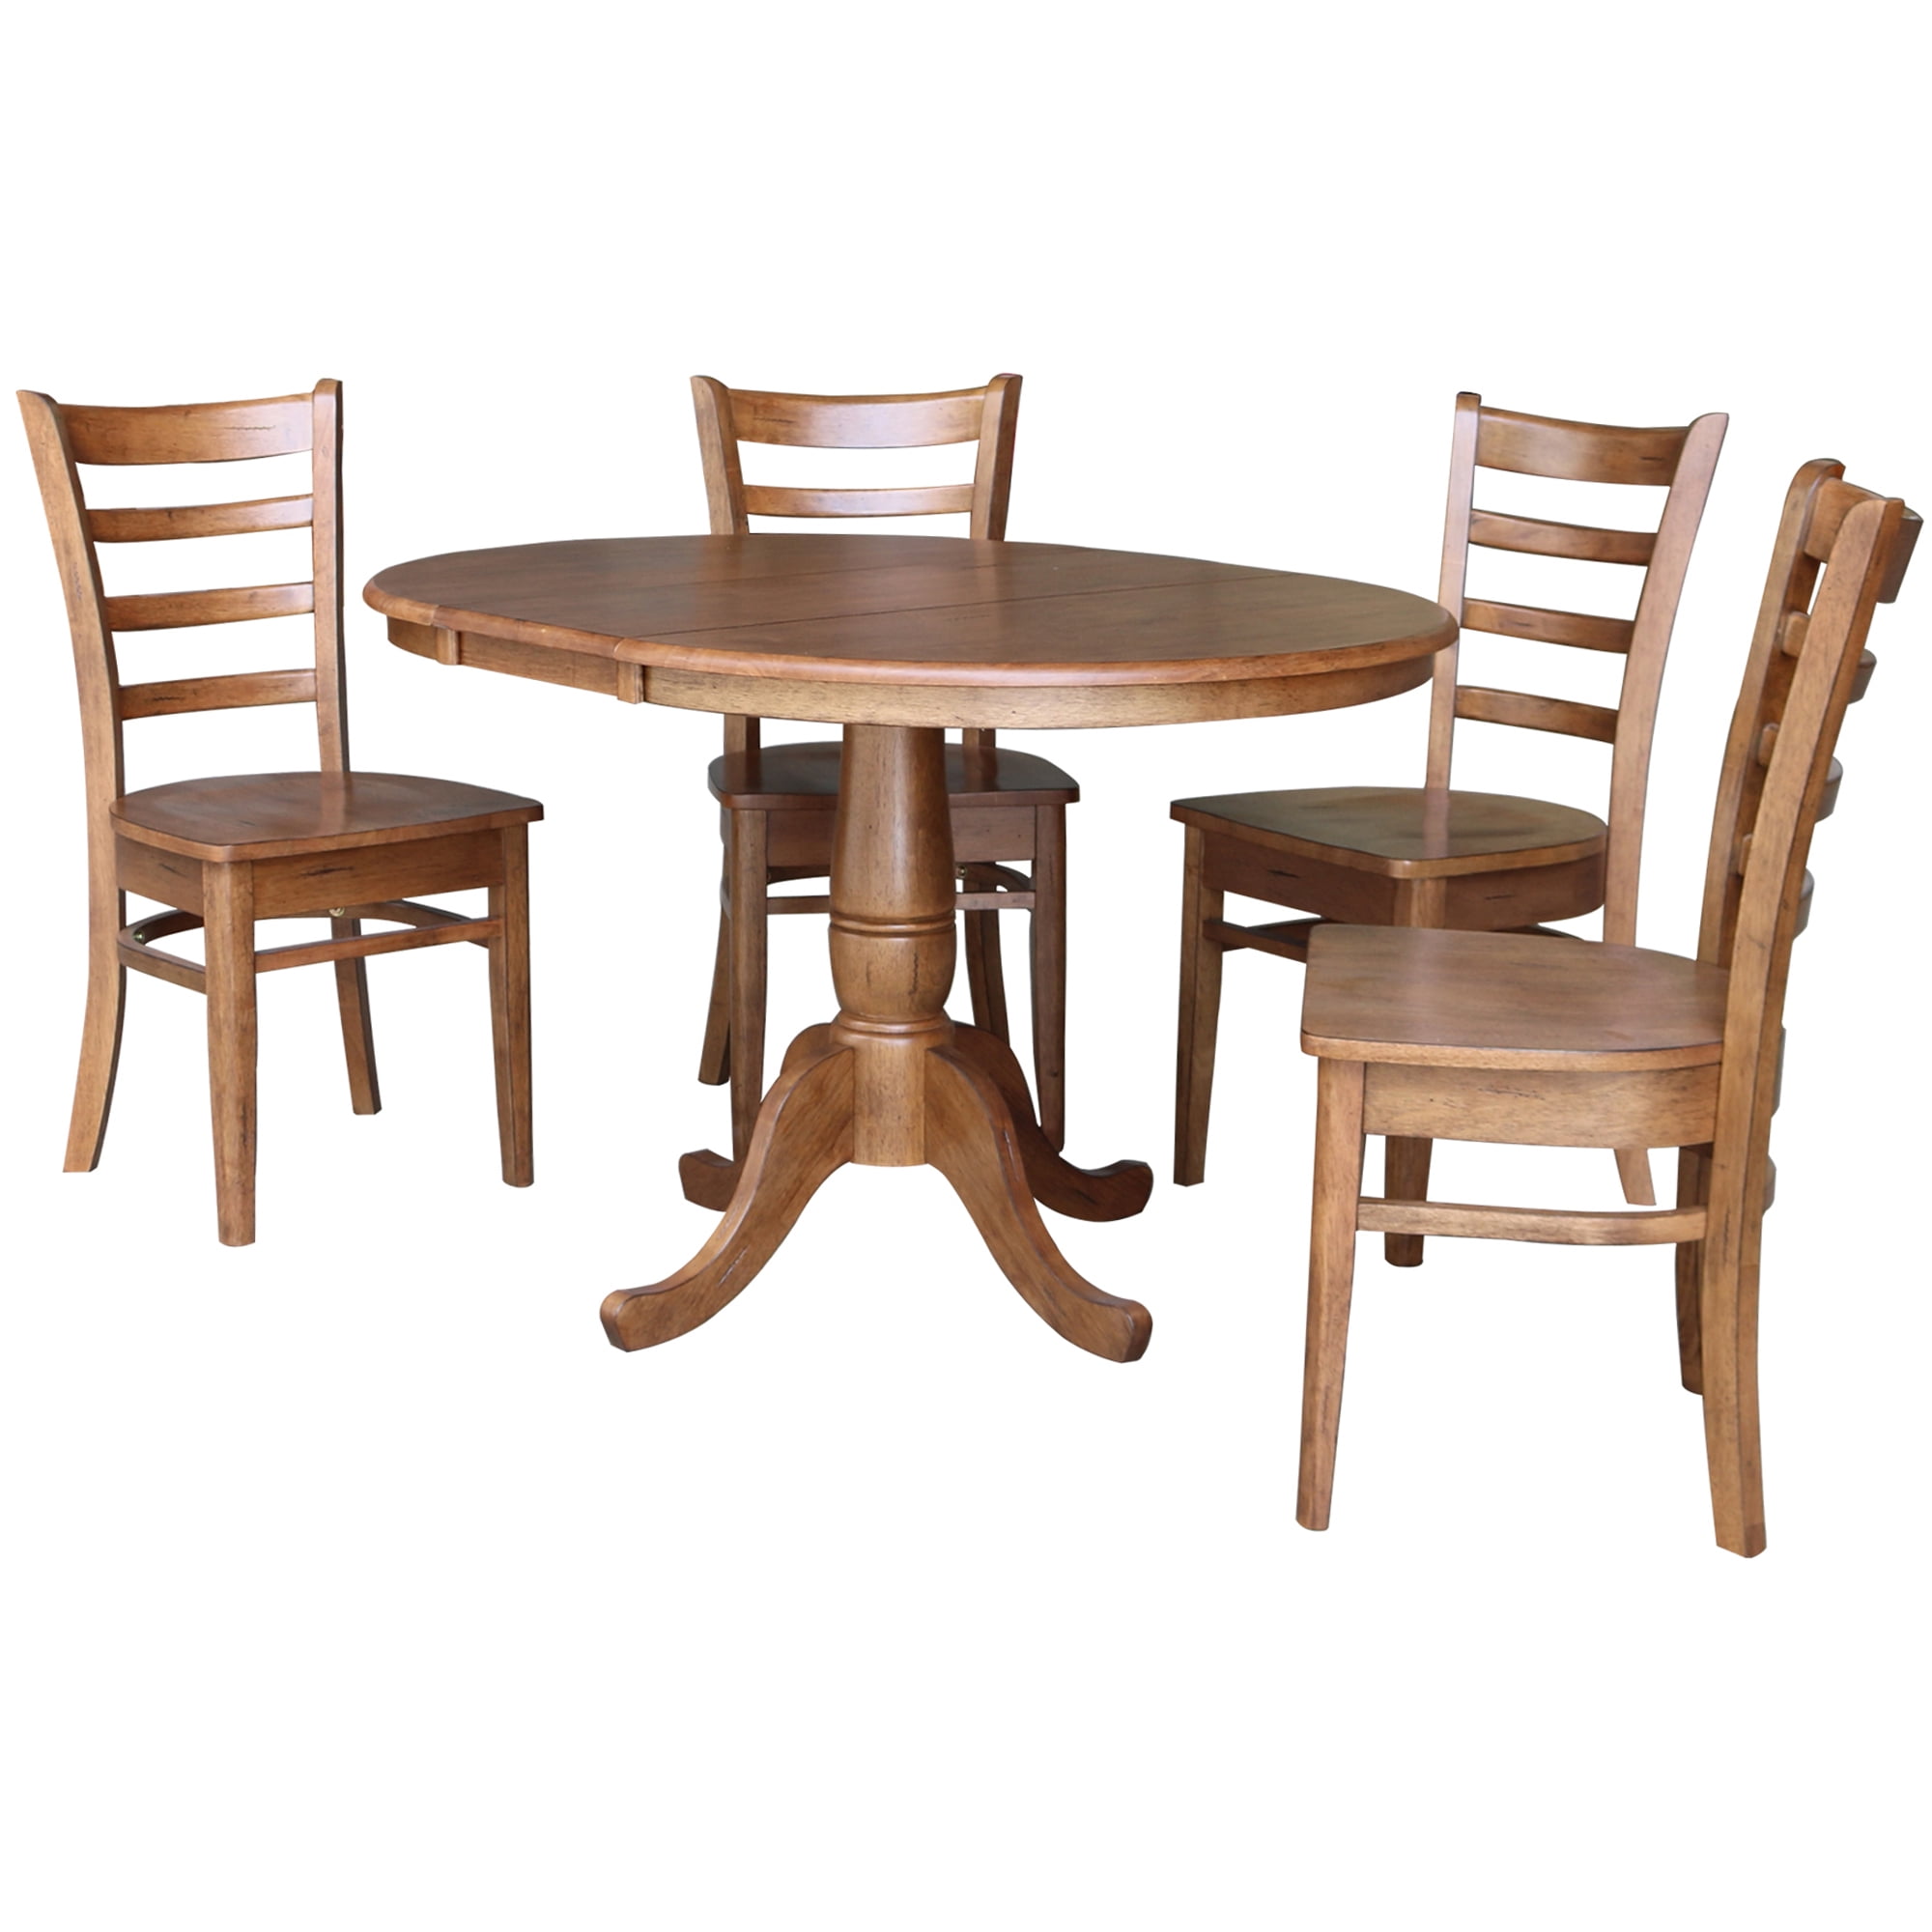 36 Round Extension Dining Table With 4, 36 Round Dining Table And Chairs